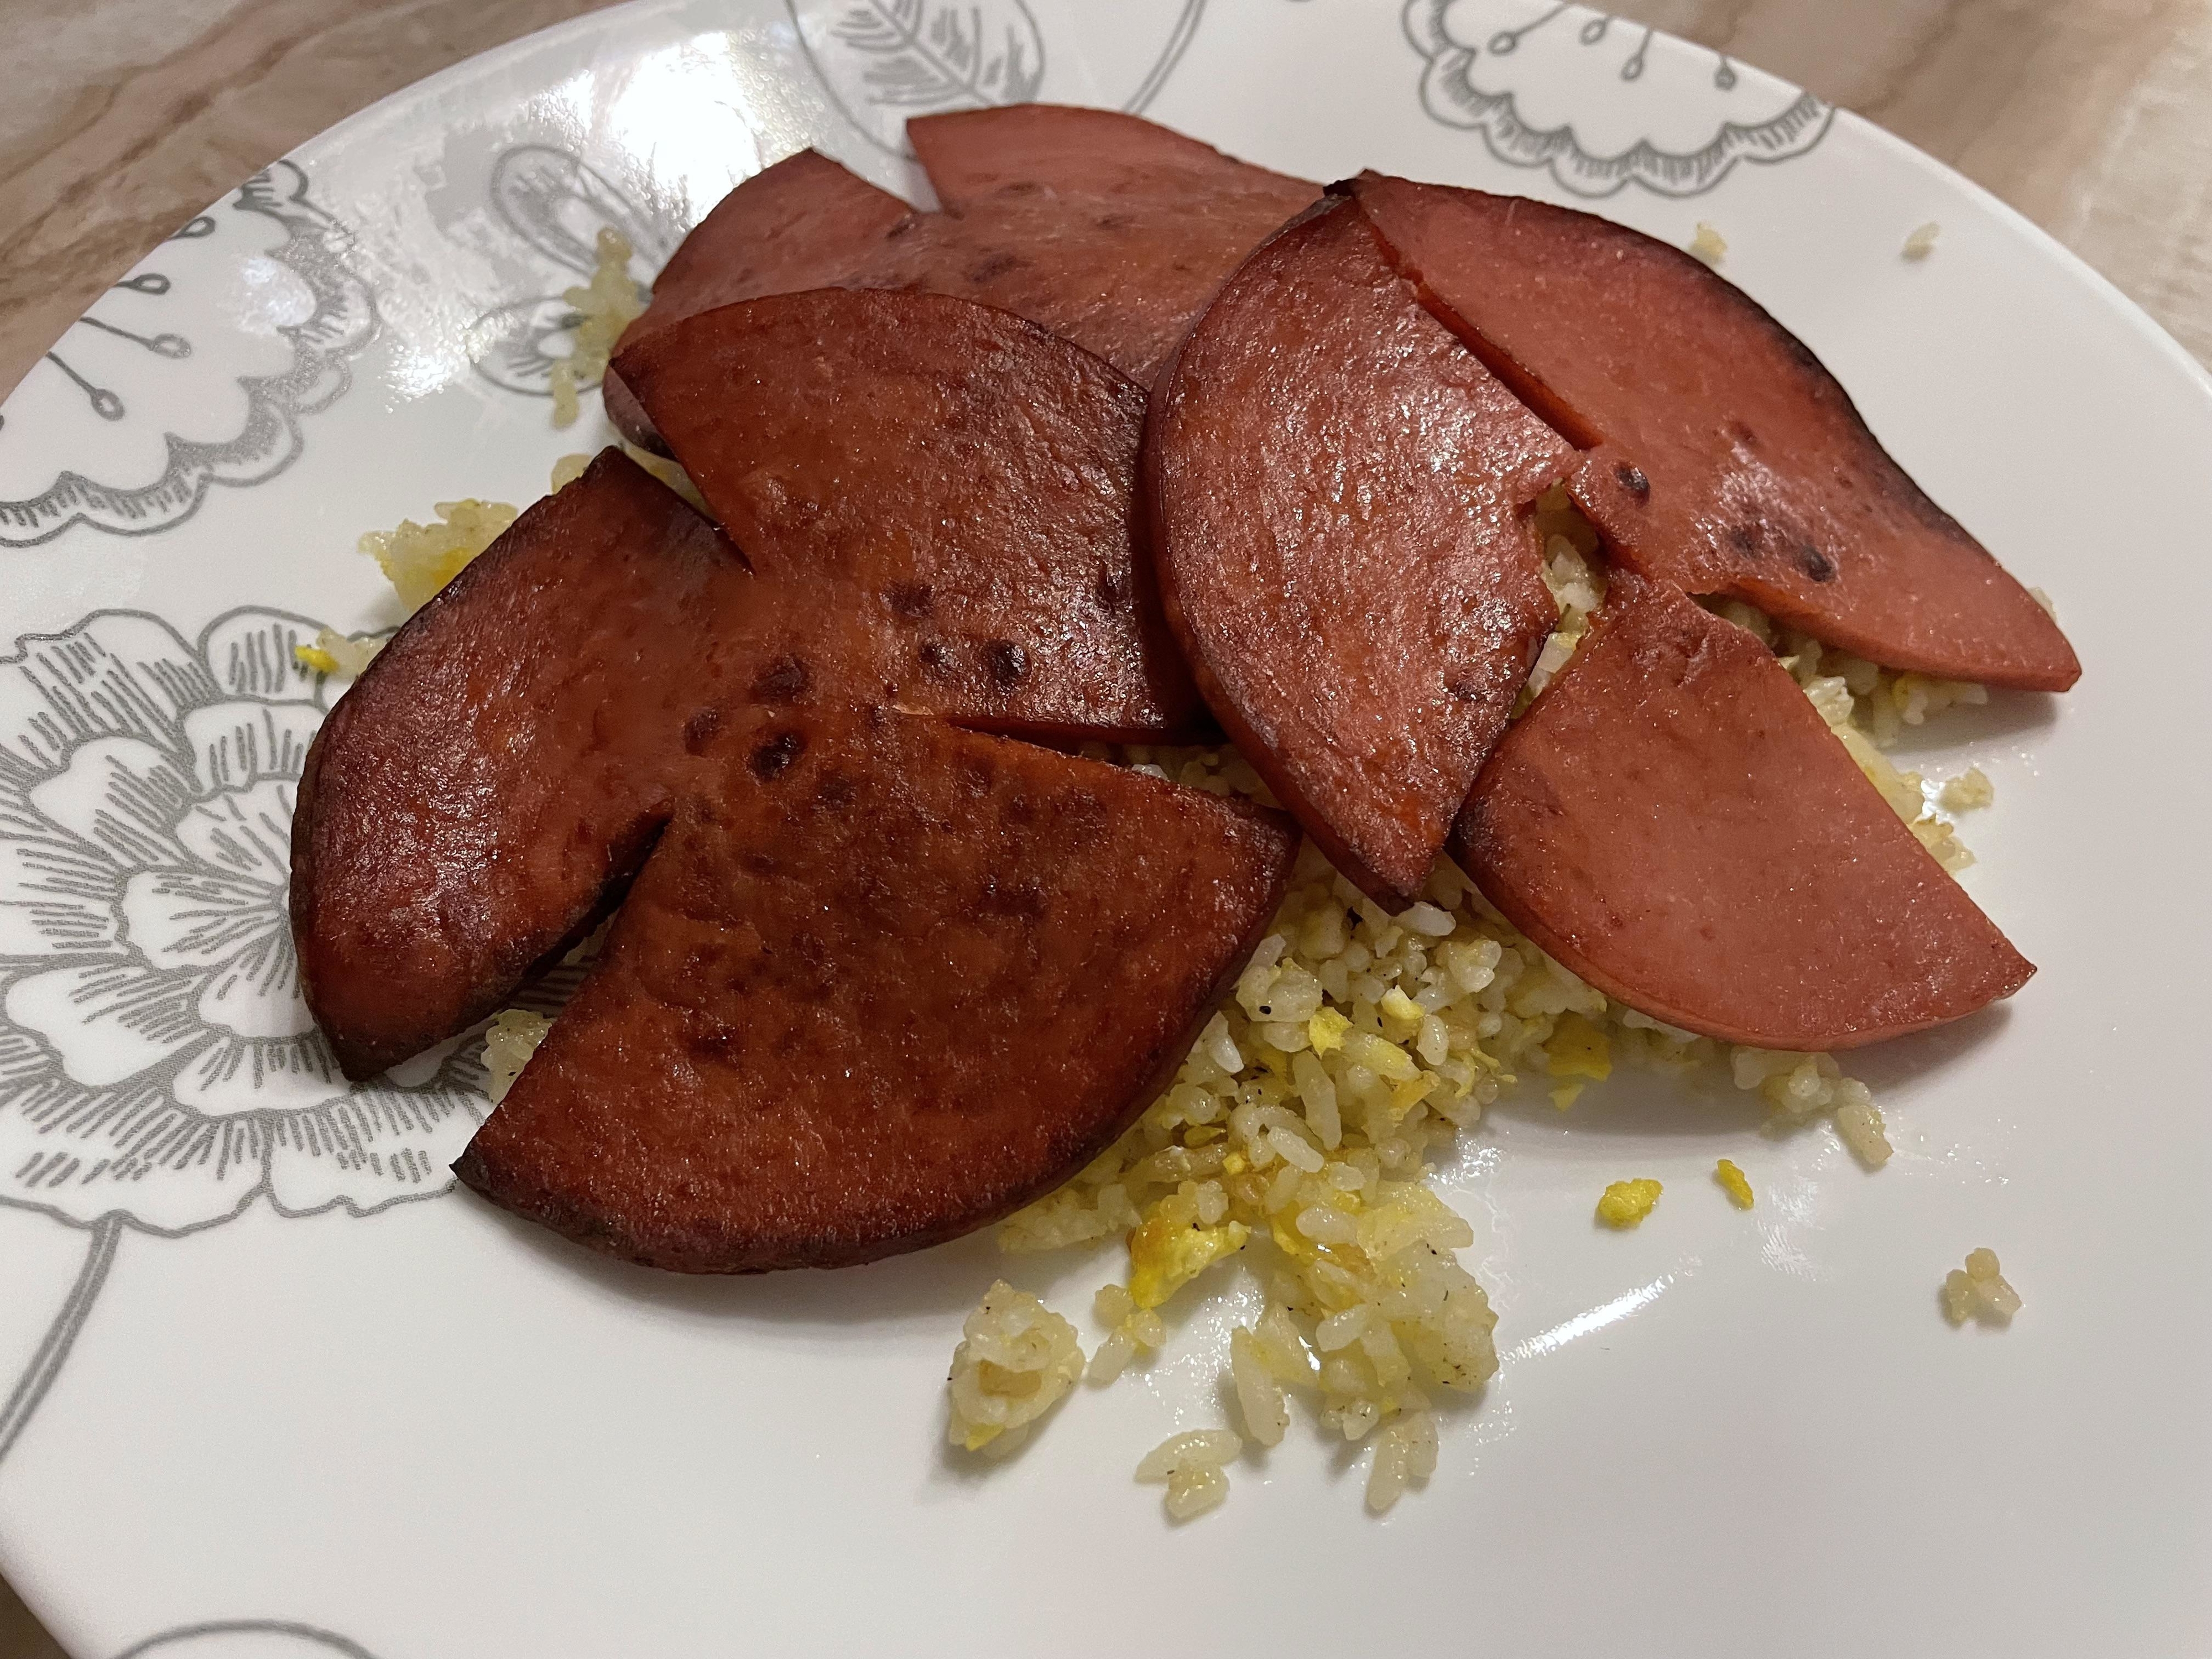 Sliced sausage served on a bed of rice on a patterned plate